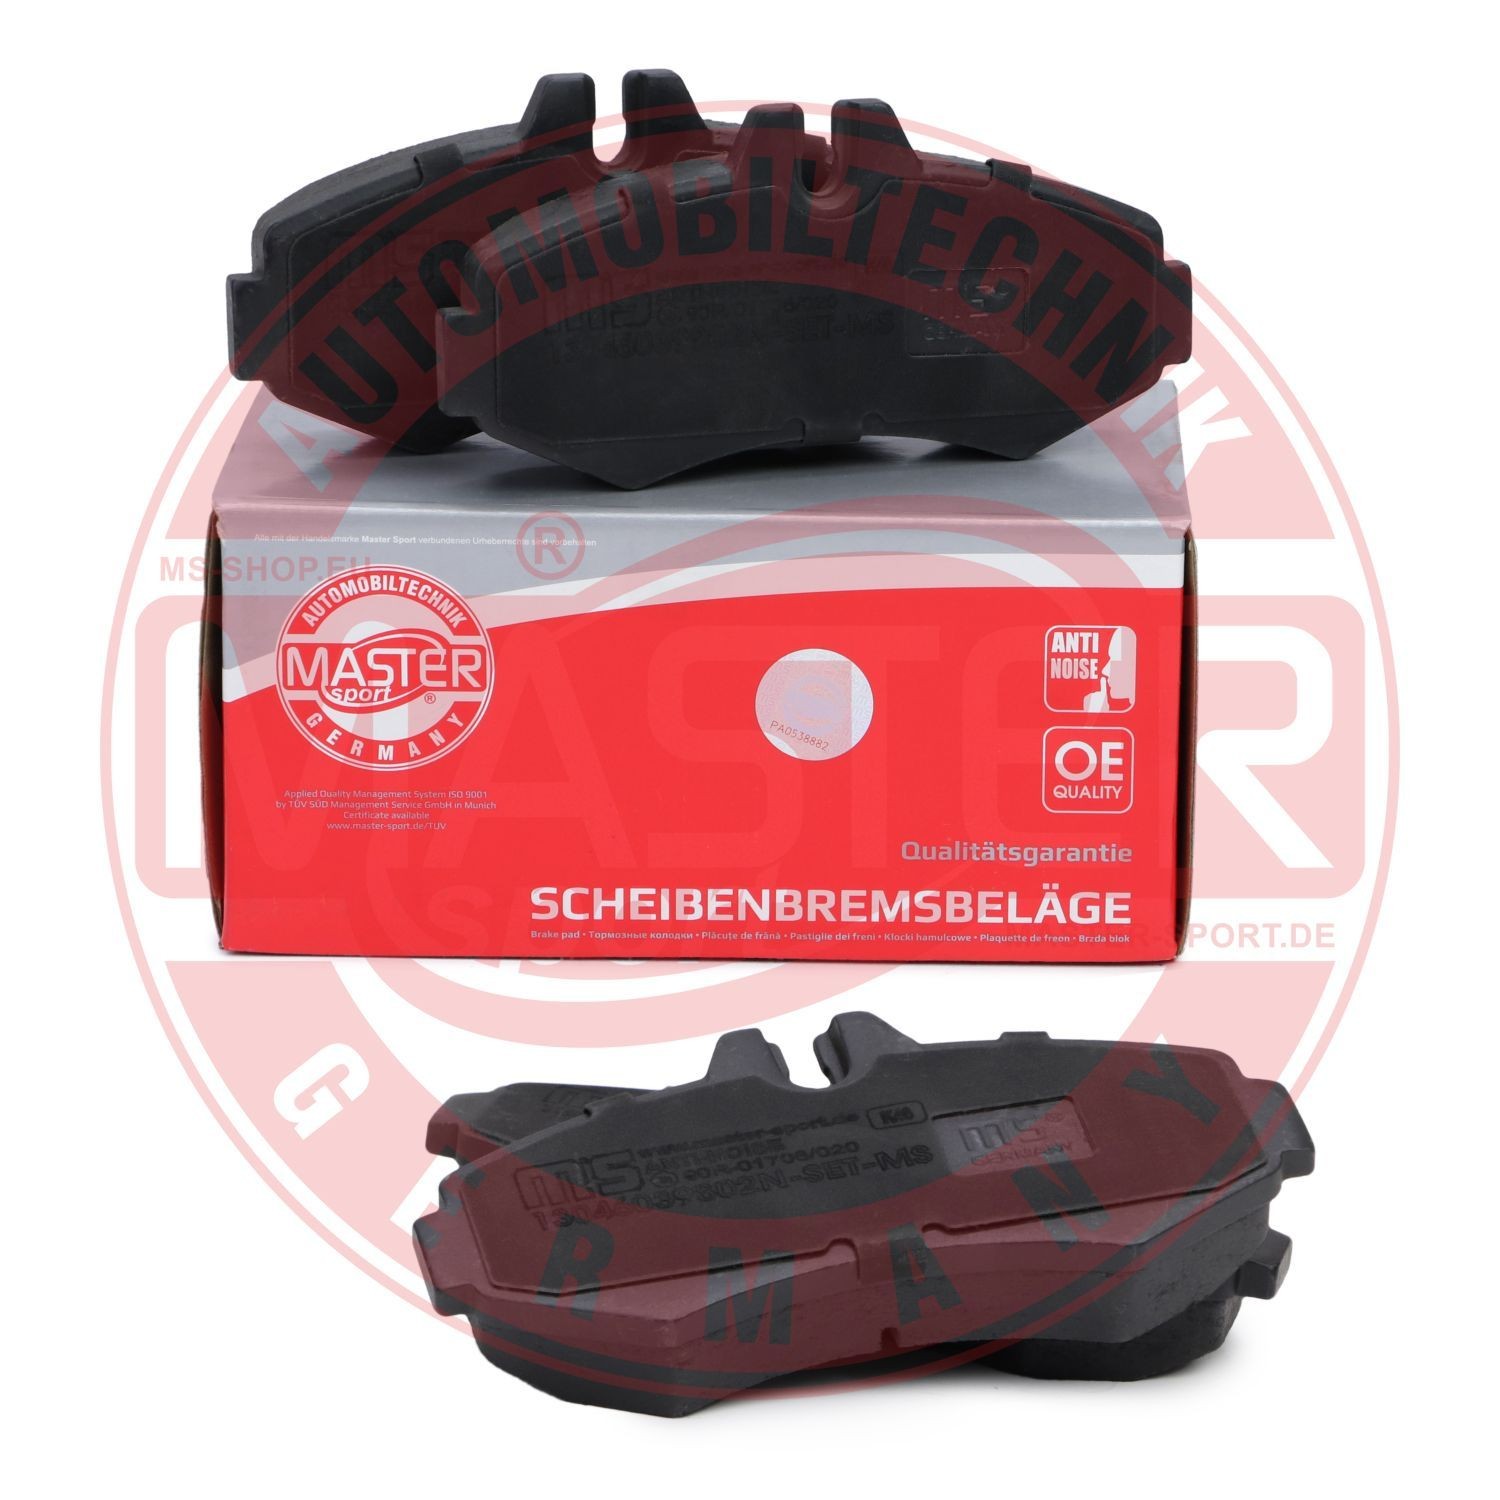 13046039802N-SET-MS Set of brake pads HD236039802 MASTER-SPORT Front Axle, prepared for wear indicator, excl. wear warning contact, with anti-squeak plate